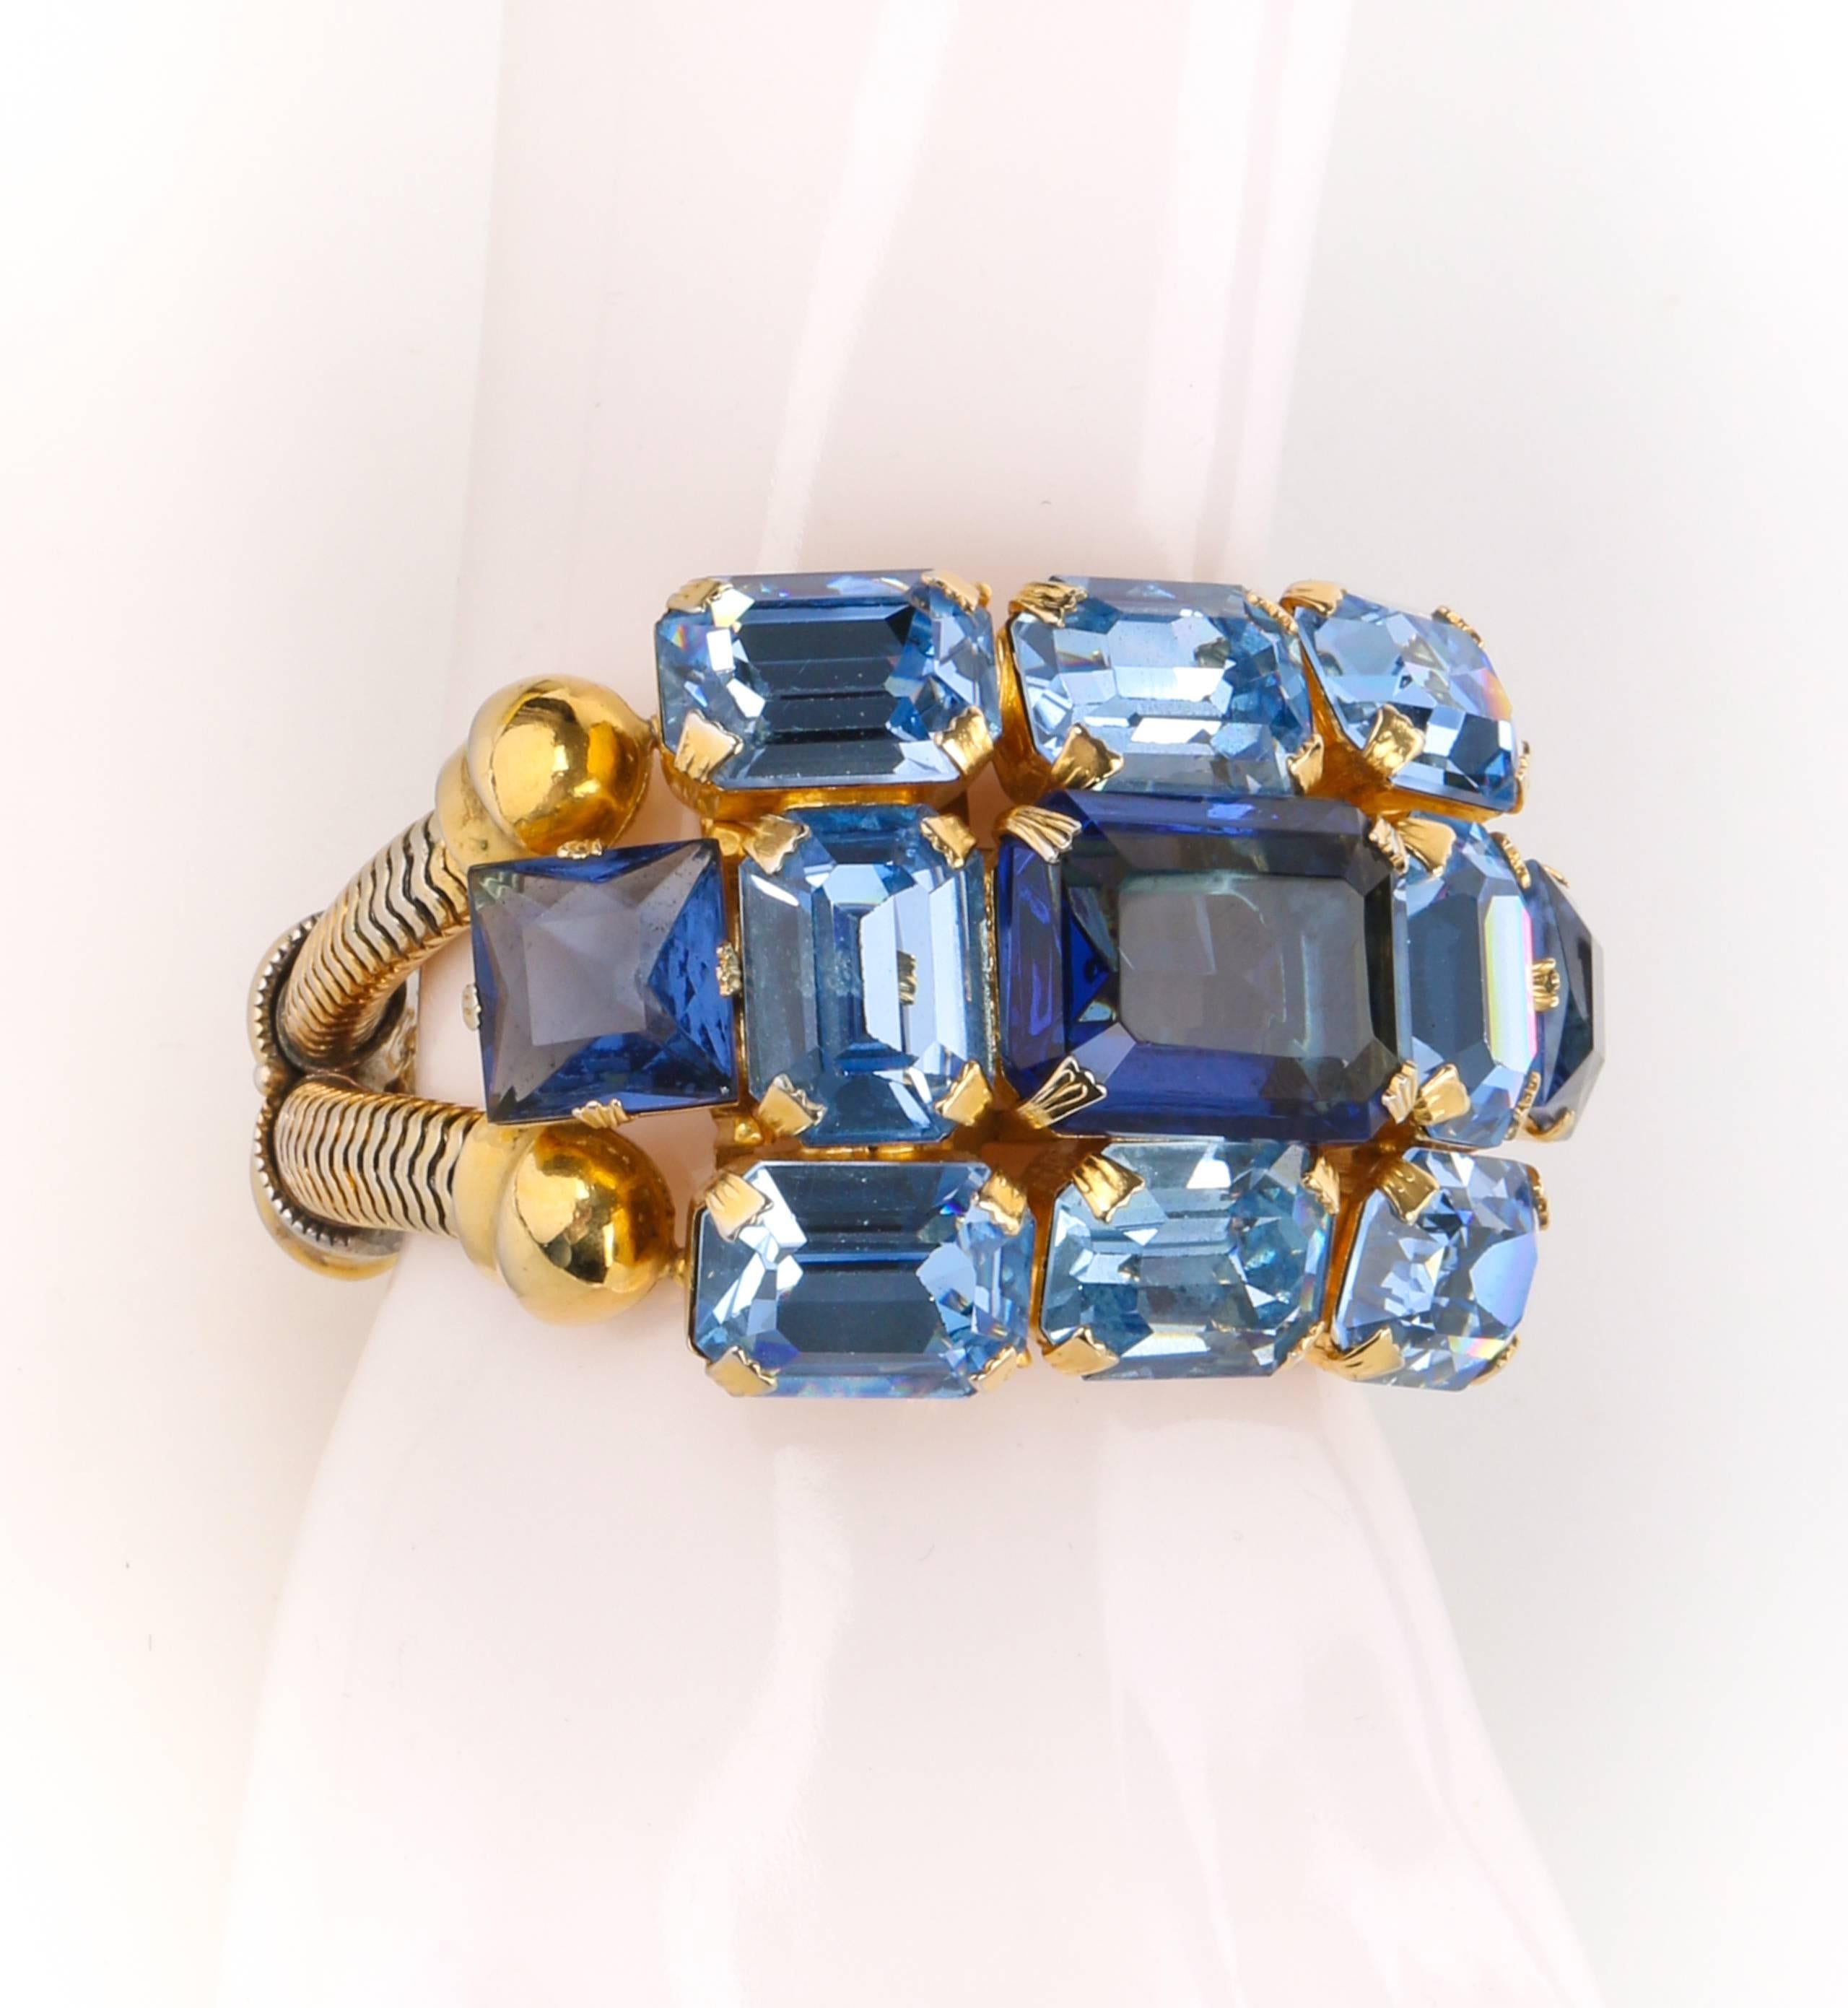 Vintage unsigned c.1950's blue glass rhinestone double banded statement bracelet. Eight prong set sky blue octagon rhinestones with two square sapphire rhinestones on either side surrounding one large sapphire blue octagon rhinestone at center.